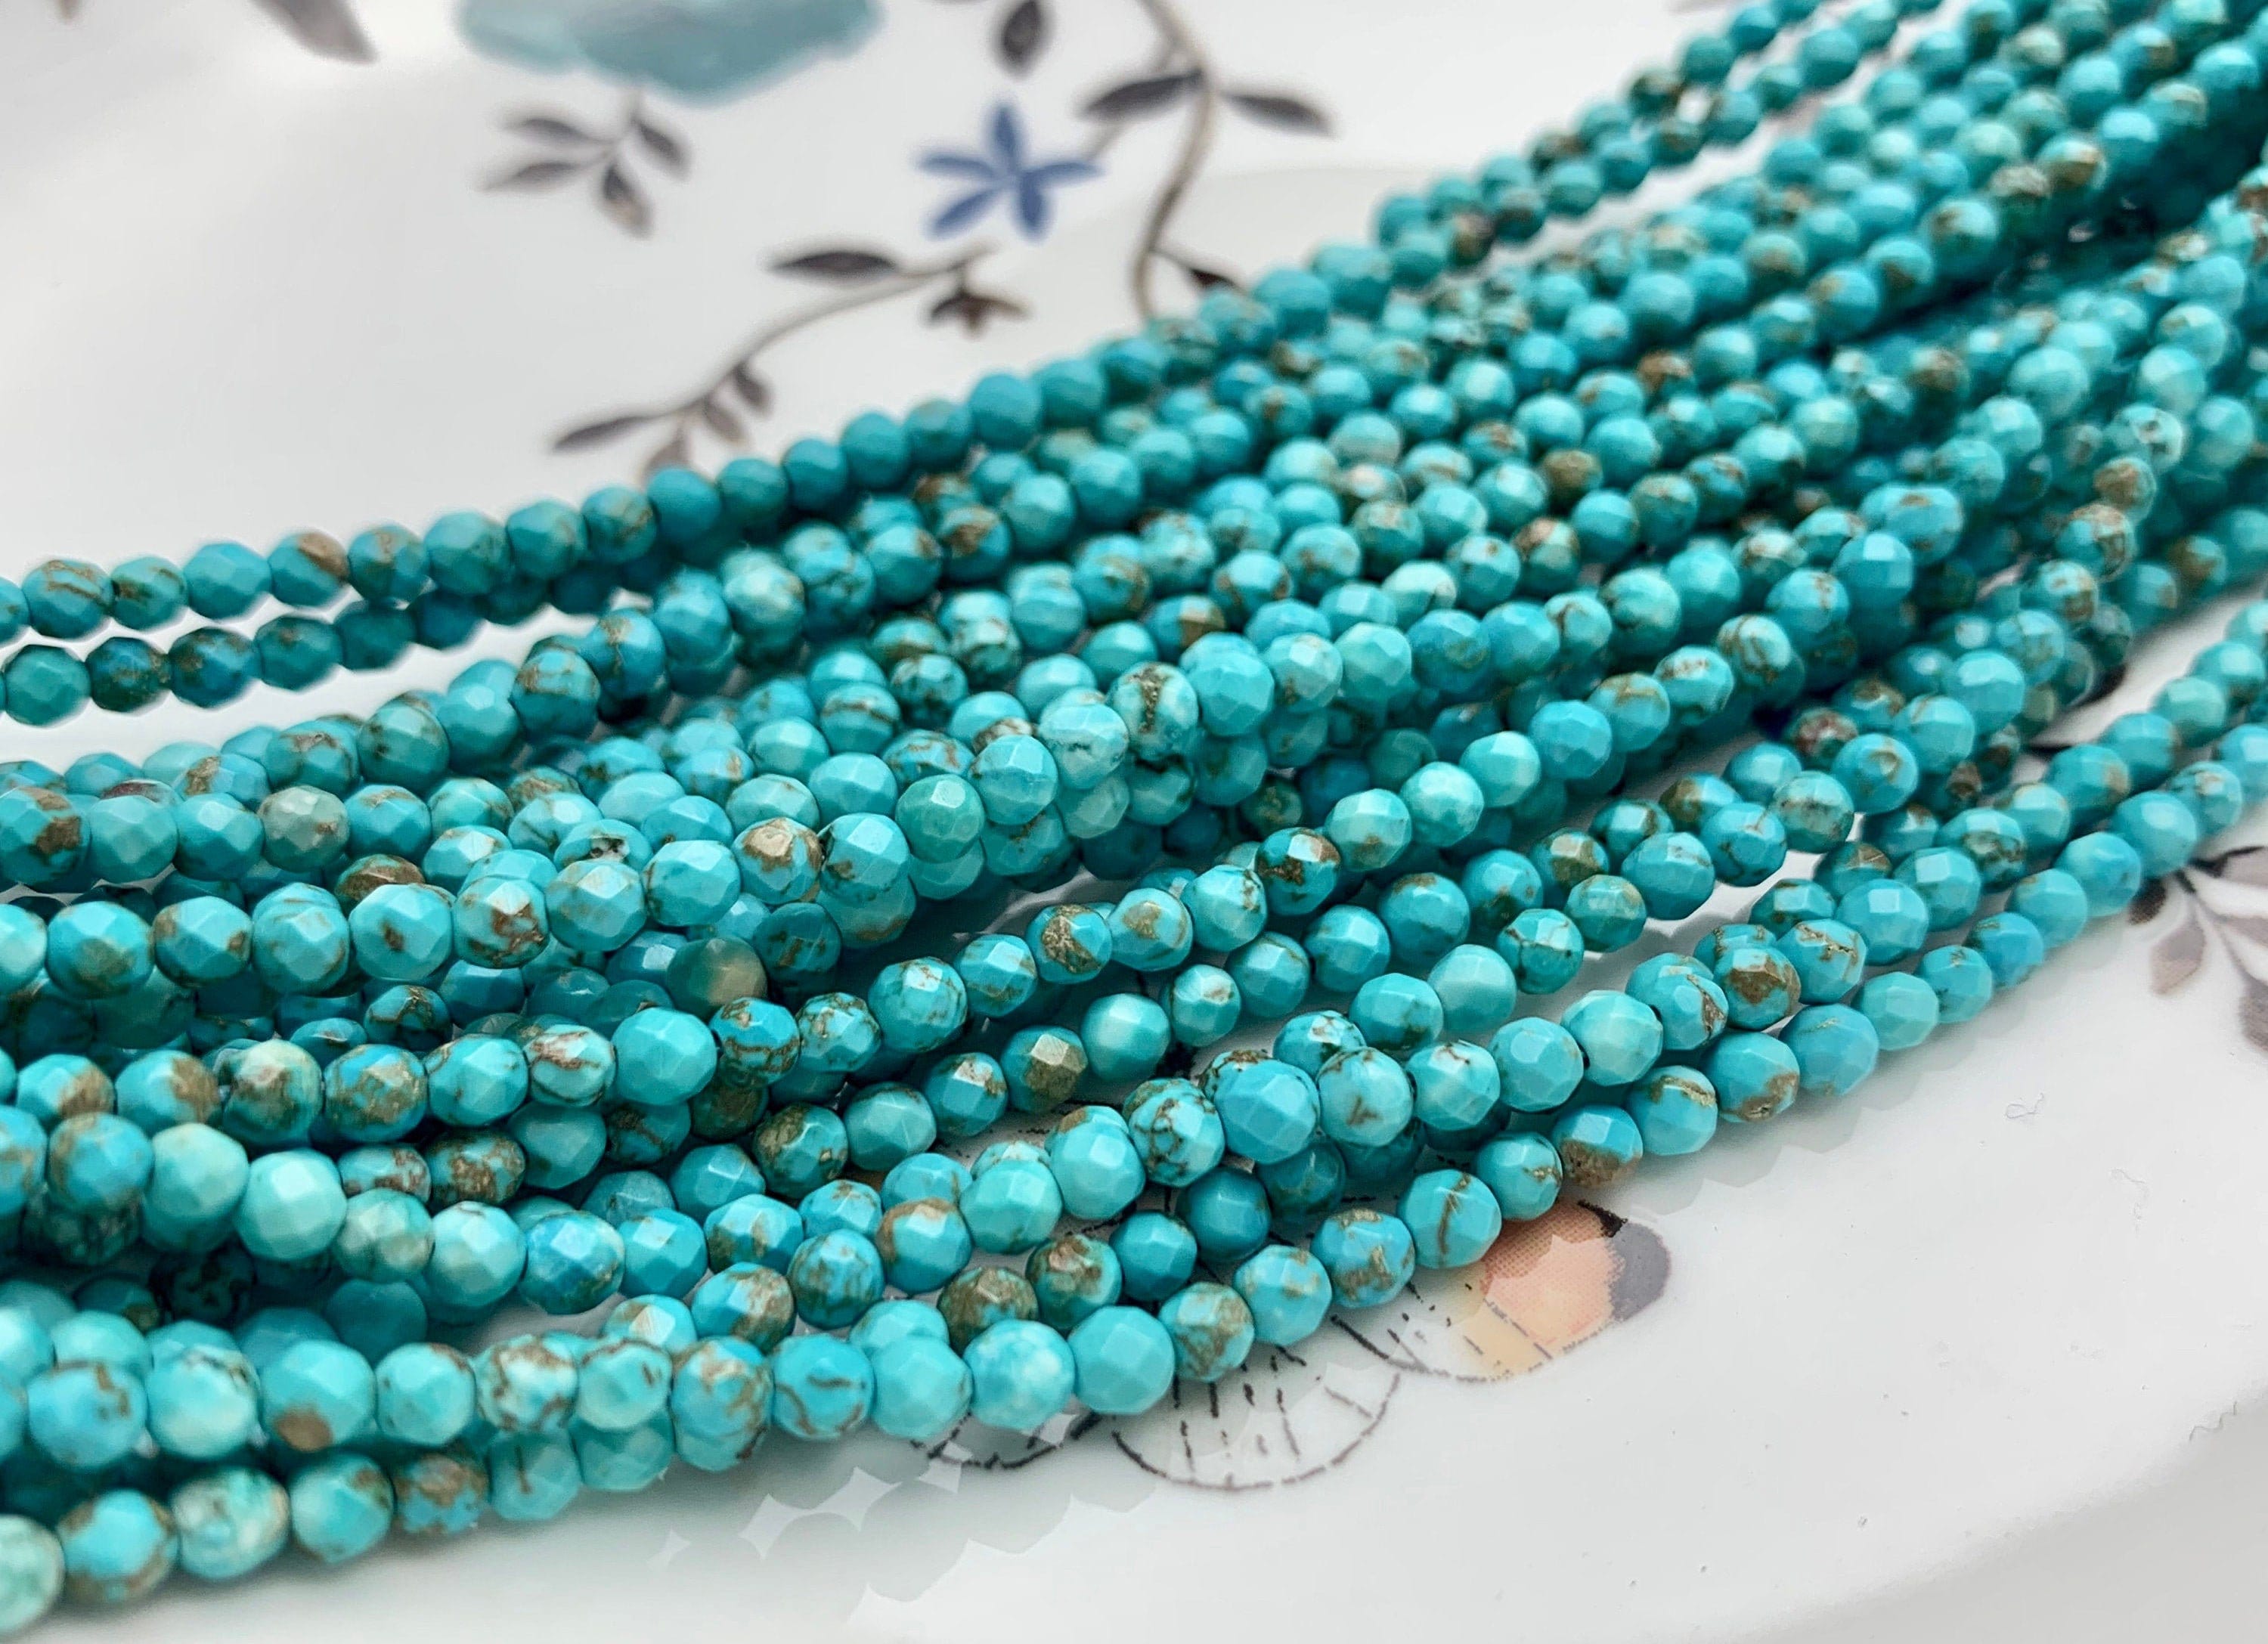 Wholesale Natural Stone Beads Blue Turquoise Round Loose Beads For